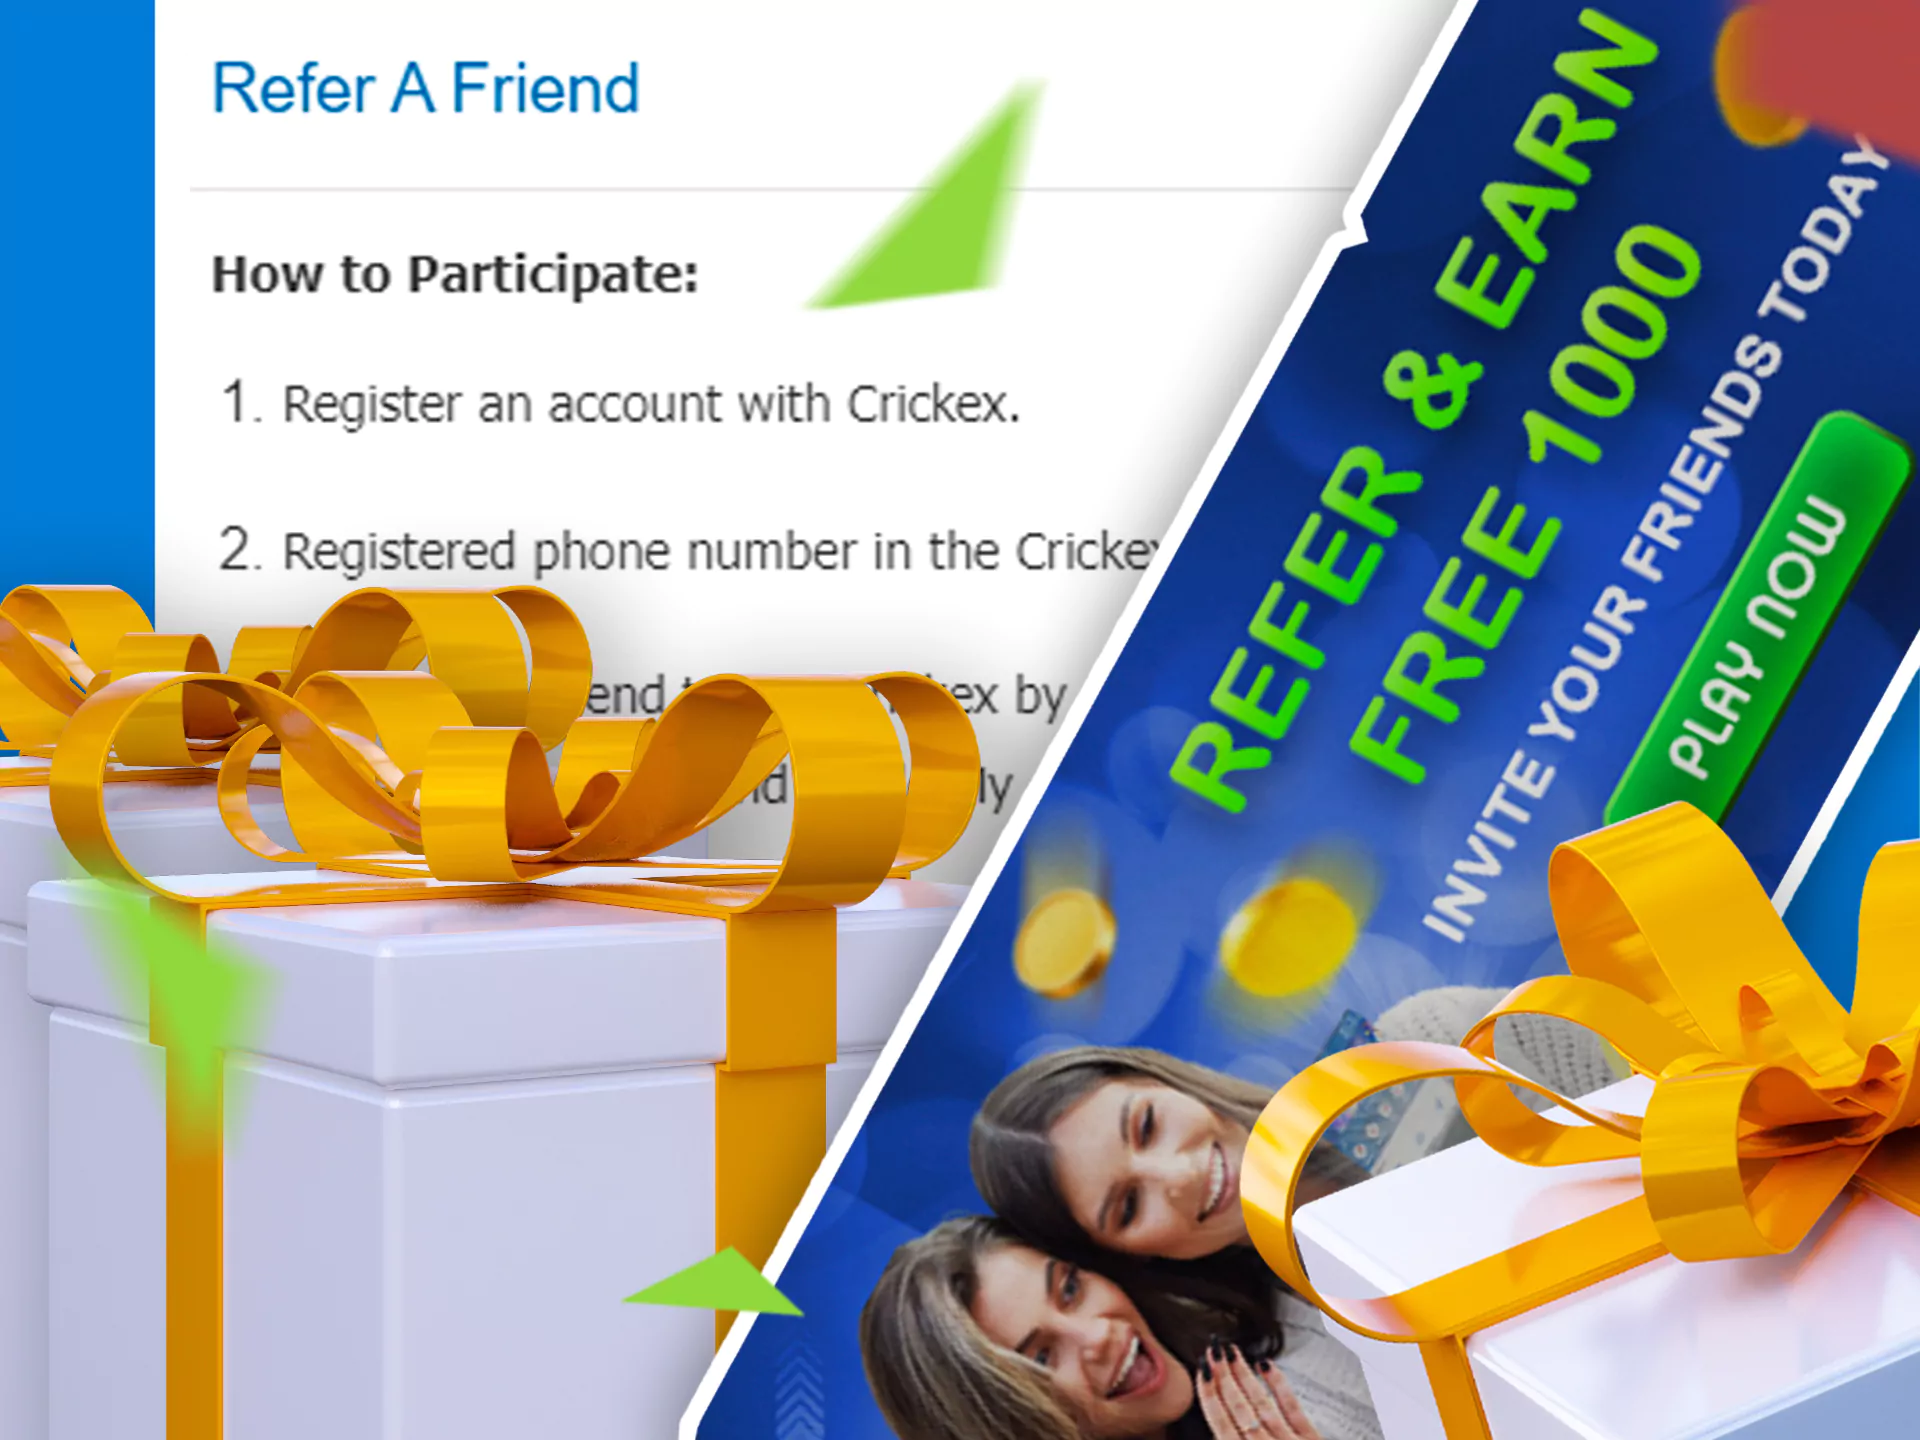 After you create an account, call your friends and get a referral bonus.